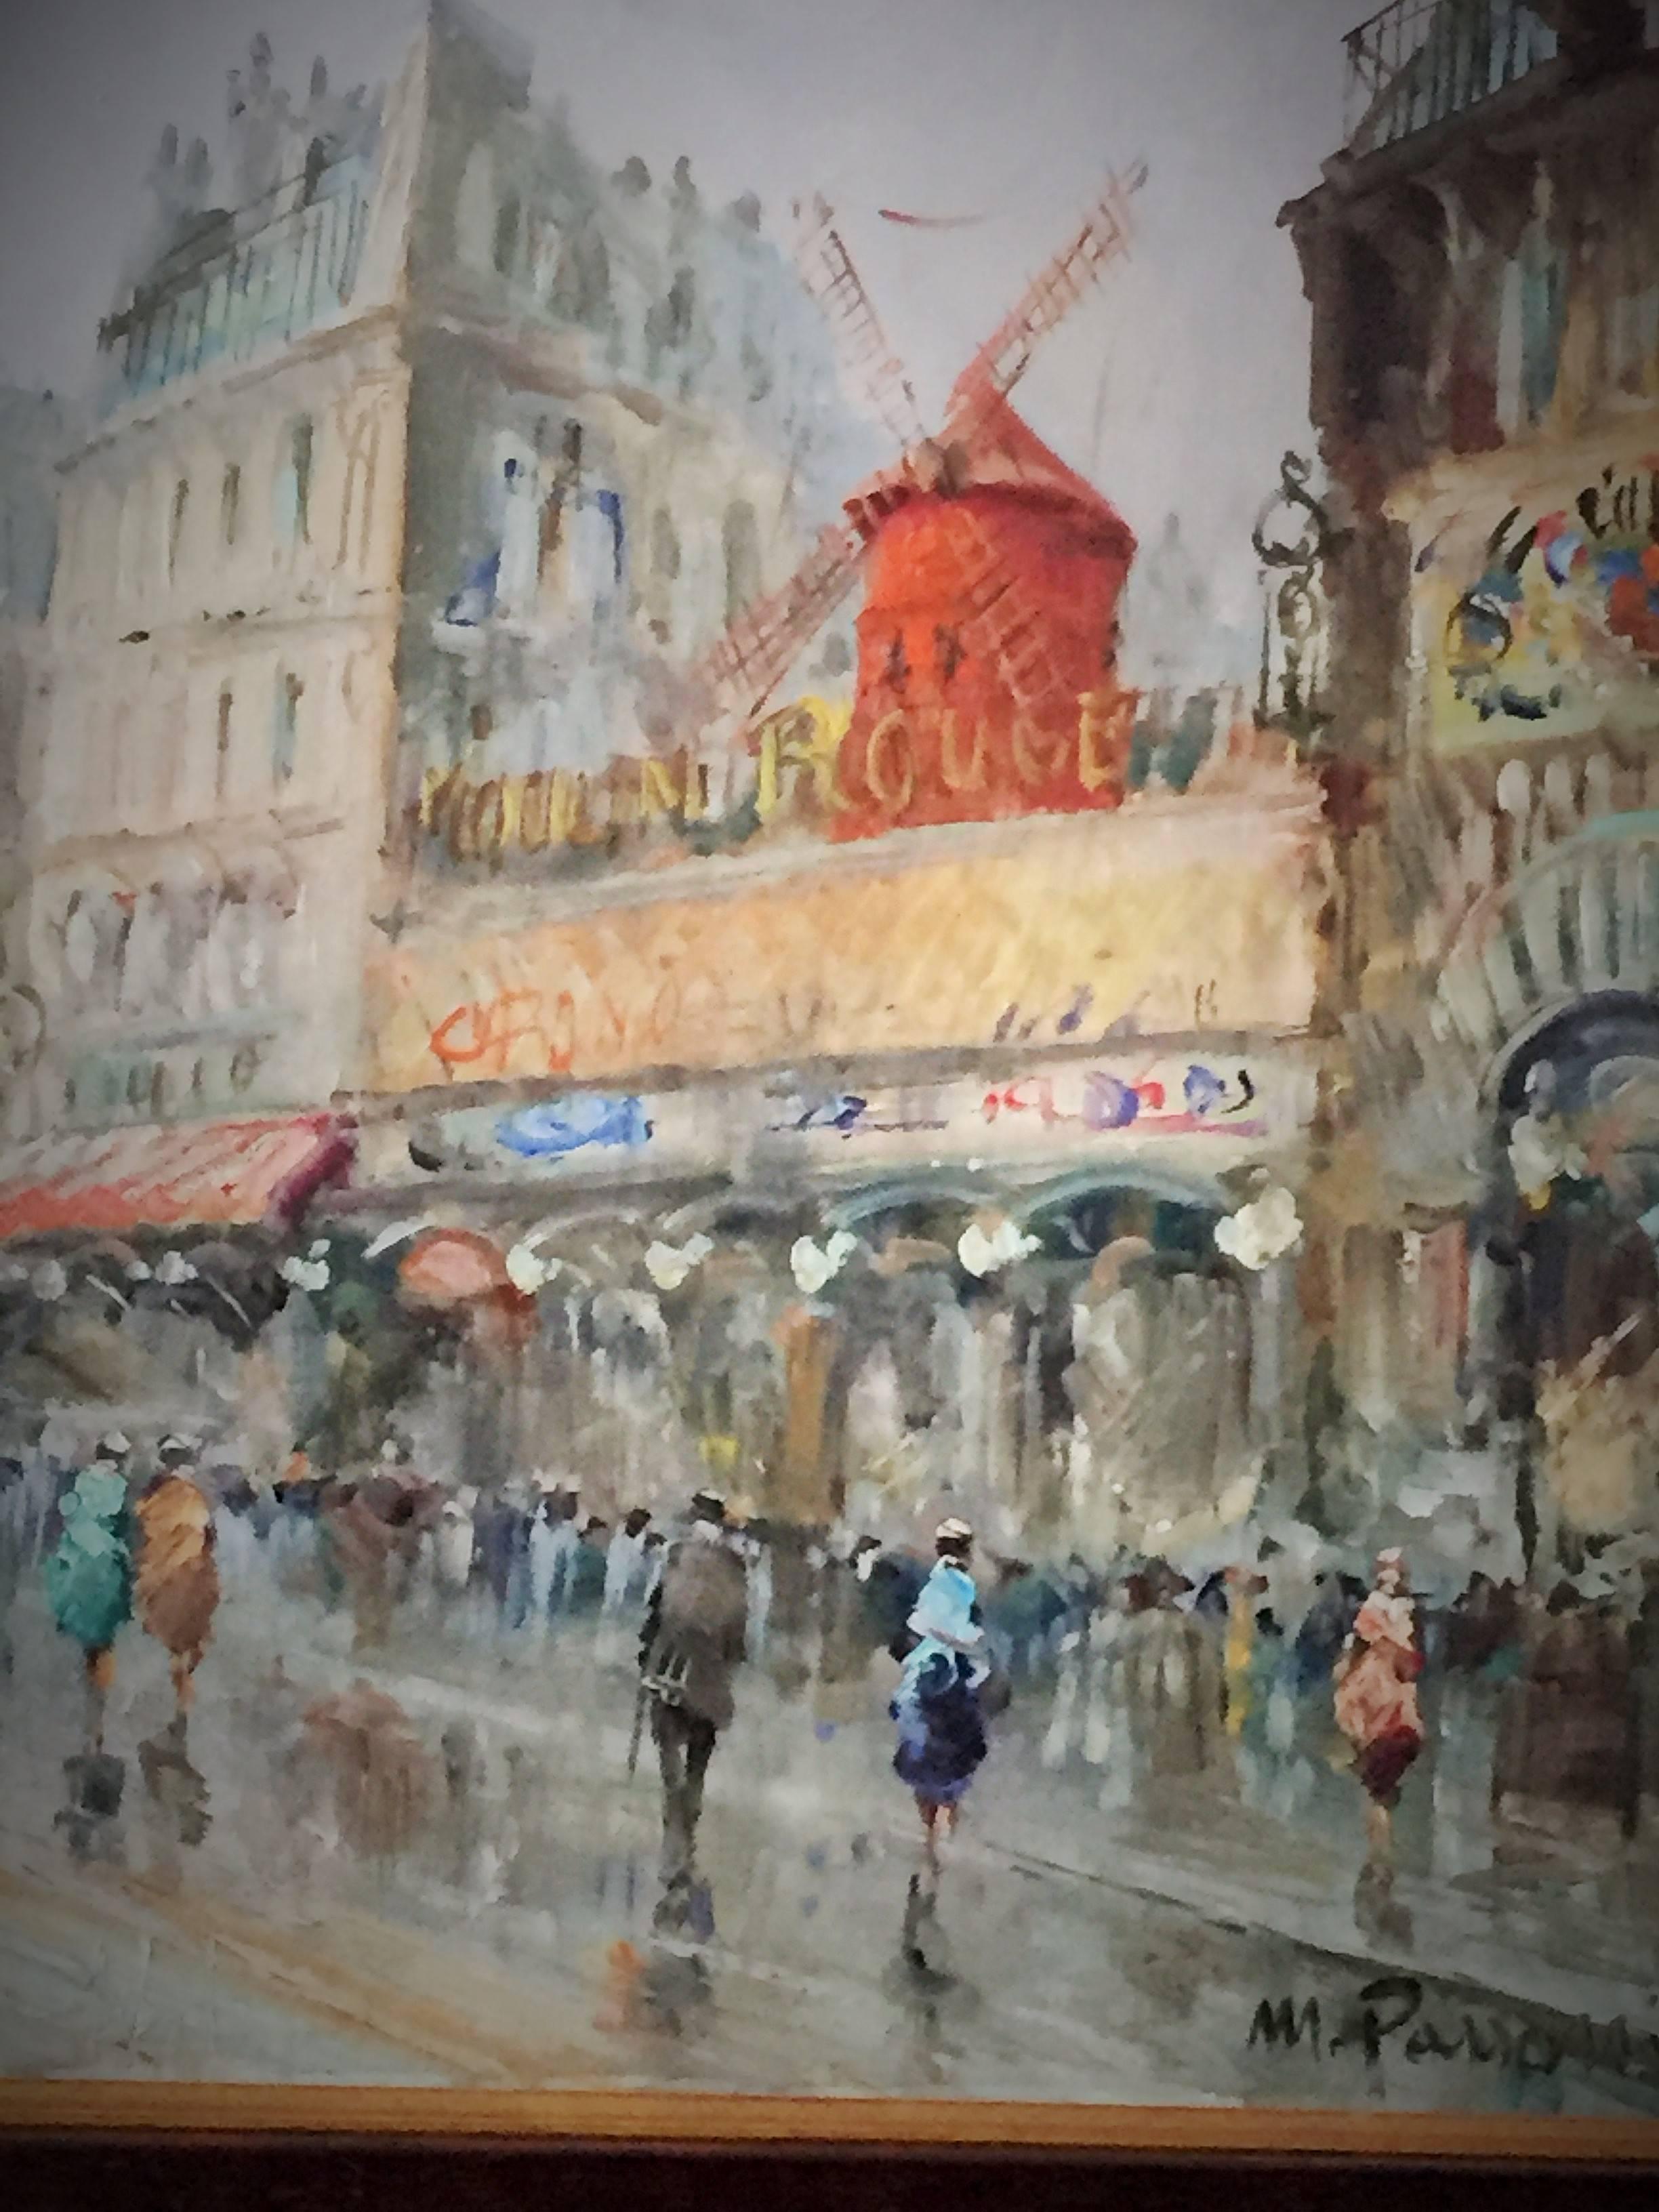 This beautiful oil on canvas painting depicts the iconic Moulin Rouge building in Paris. The classic cityscape composition, signed on the bottom right shows figures, but is focused mainly on the legendary Moulin.

Mario Passoni was born in Naples in